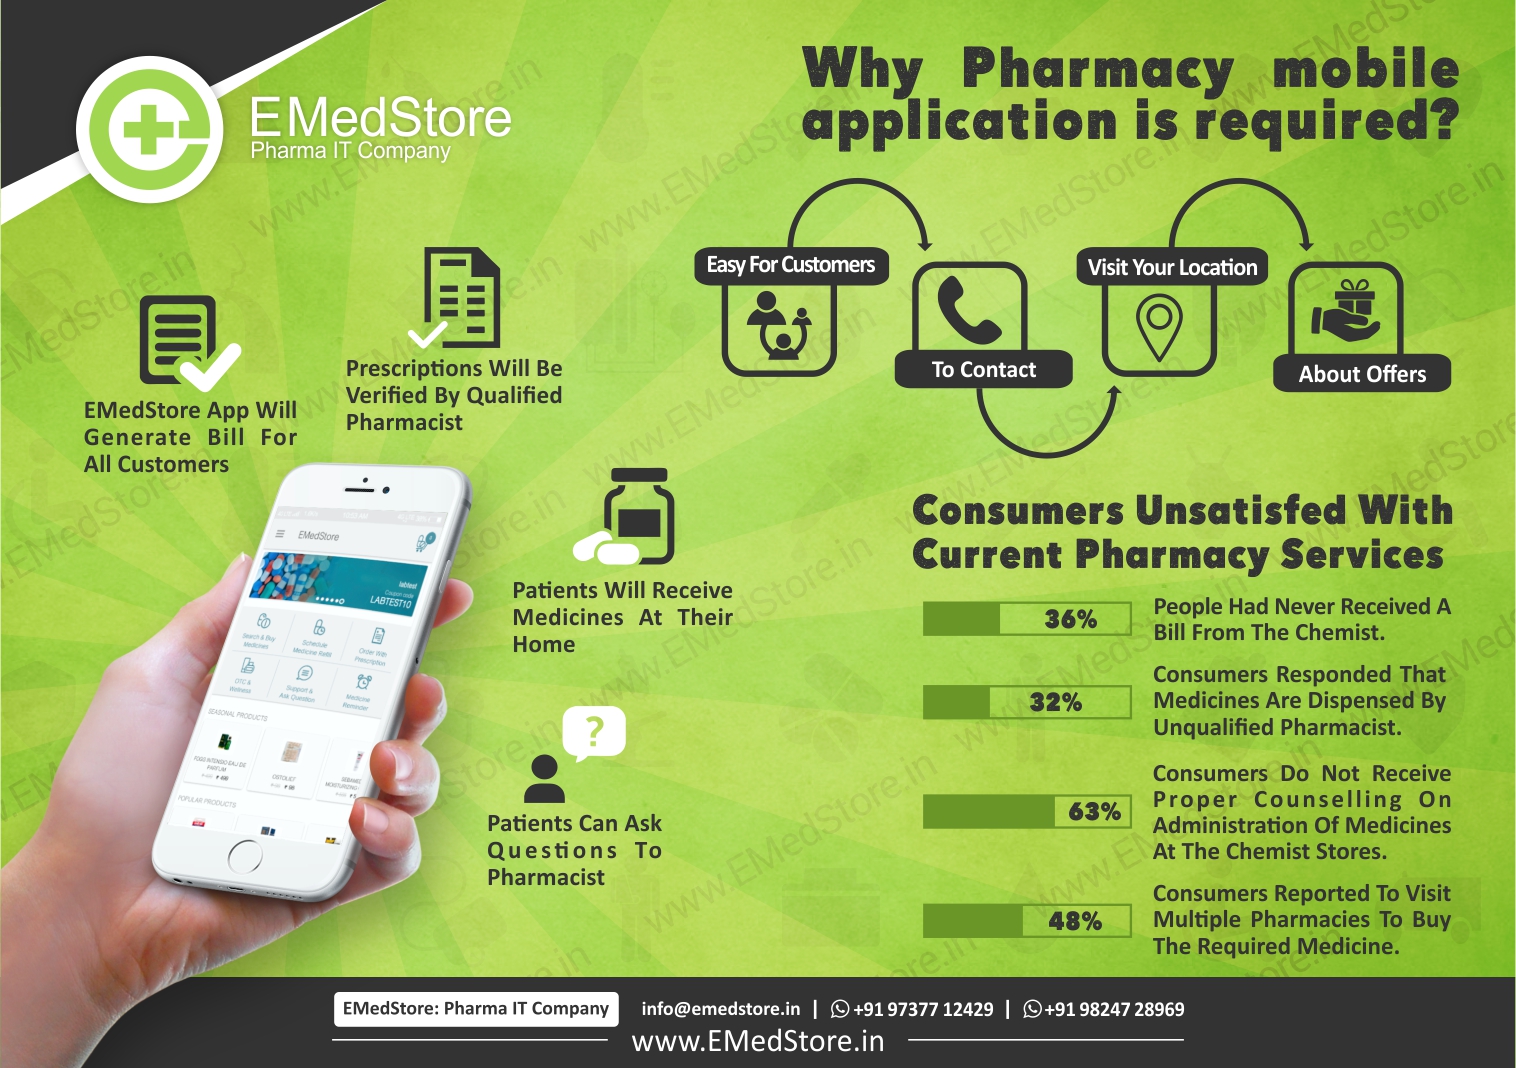 Why pharmacy mobile application is required?

